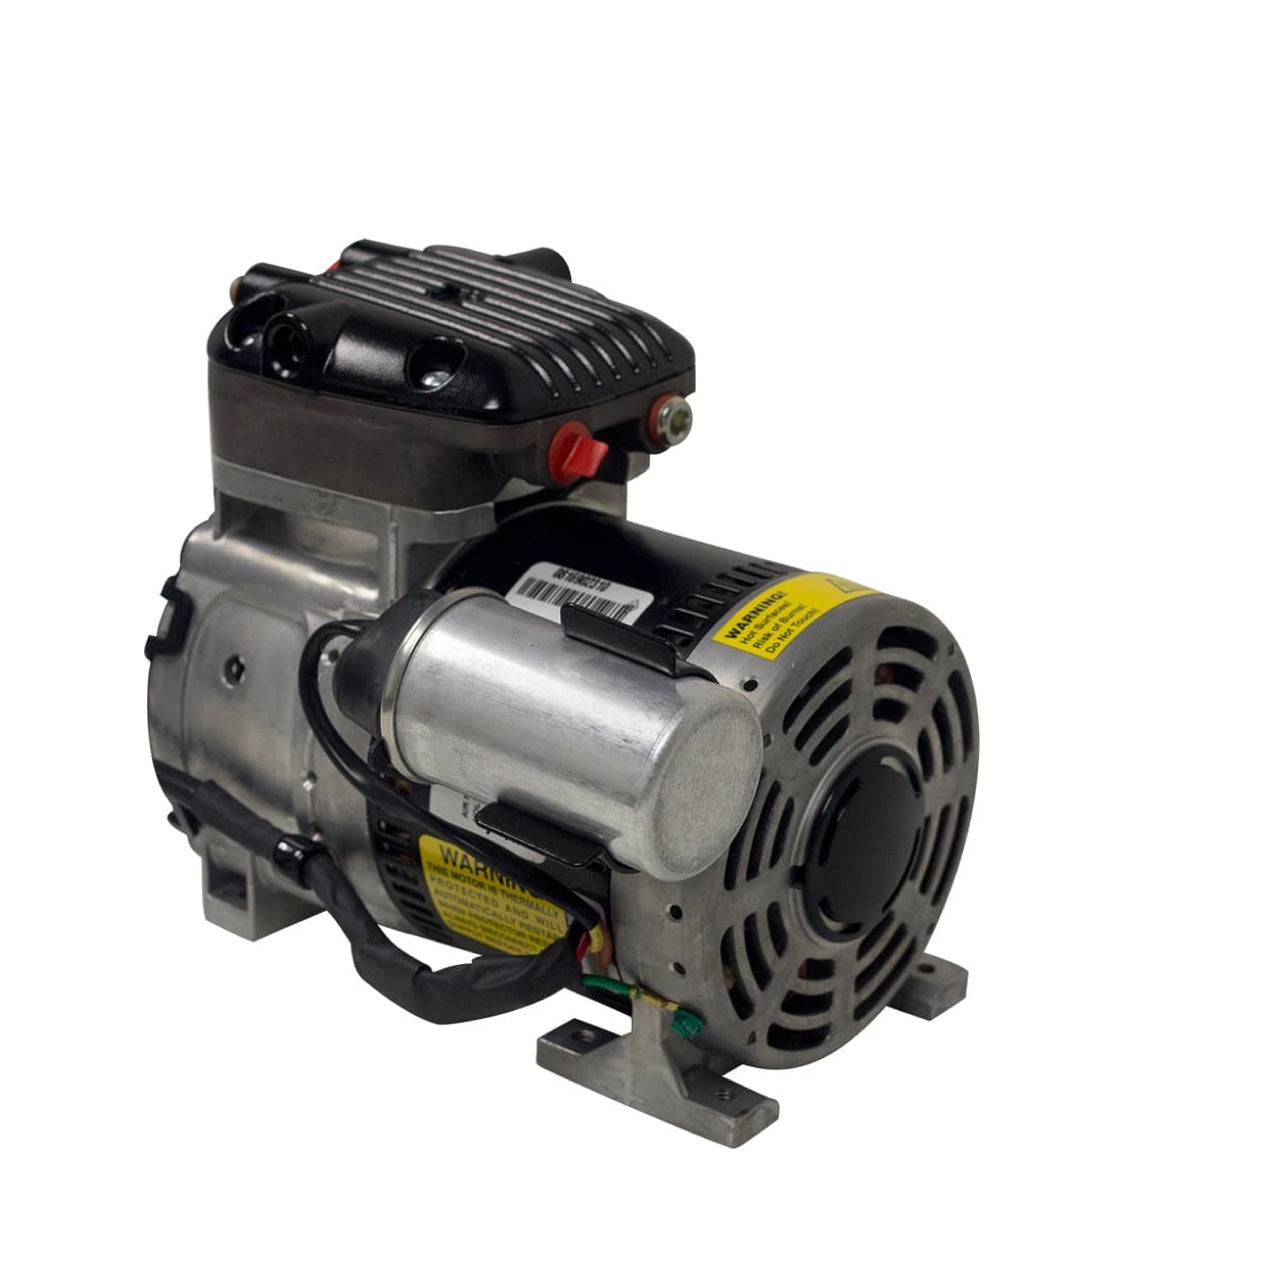 Airmax® SilentAir RP Series Rocking Piston Compressors - American Pond Supplies Airmax® G25 (RP25 87R) 1/4Hp Compressor / 230V Pond and Lake Aeration Replacement Compressor Pond and Lake Aeration Replacement Compressor